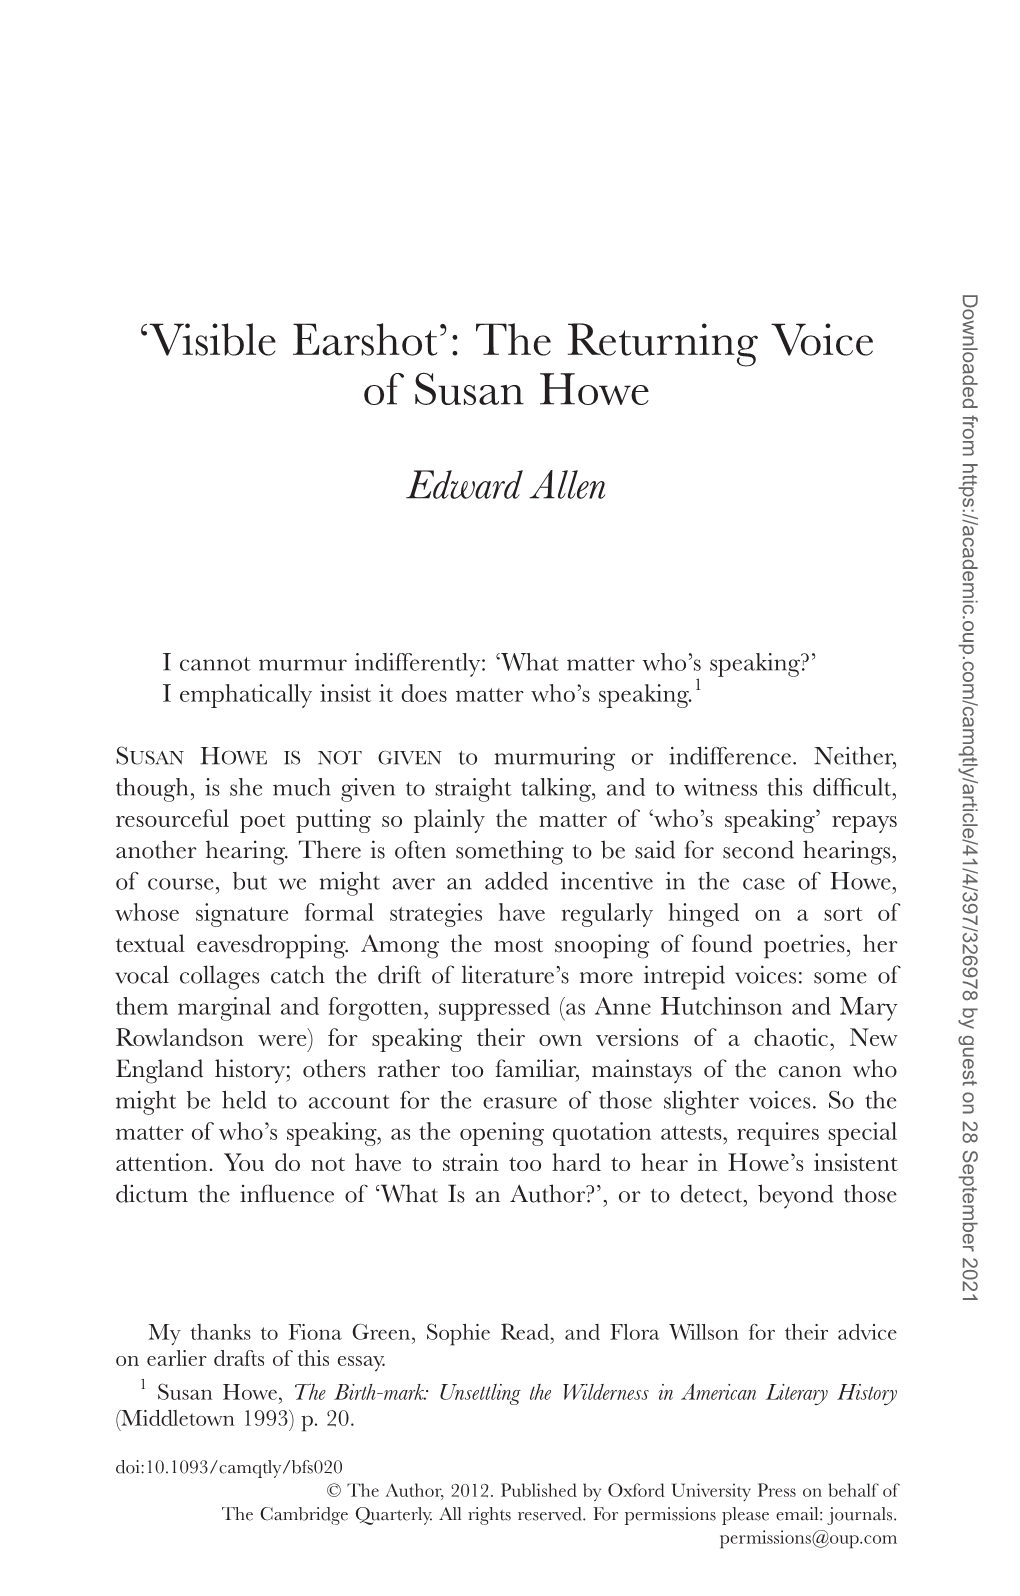 'Visible Earshot': the Returning Voice of Susan Howe